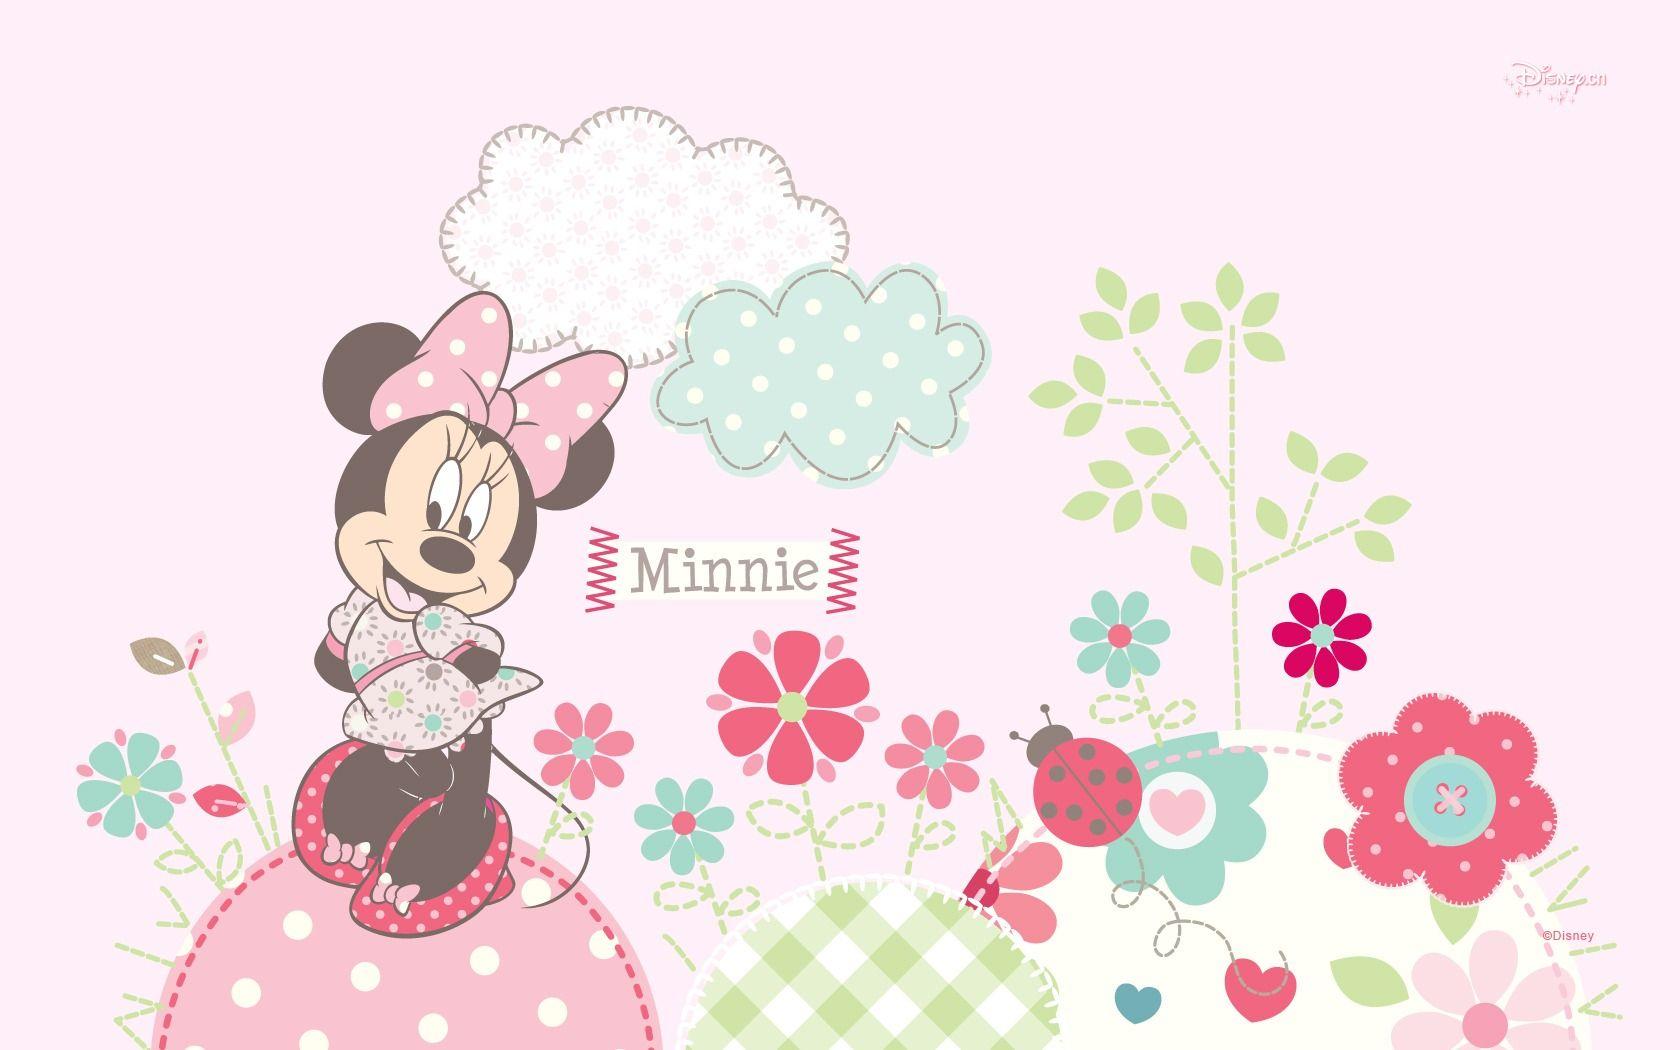 Minnie Mouse wallpaper for kids. - Minnie Mouse